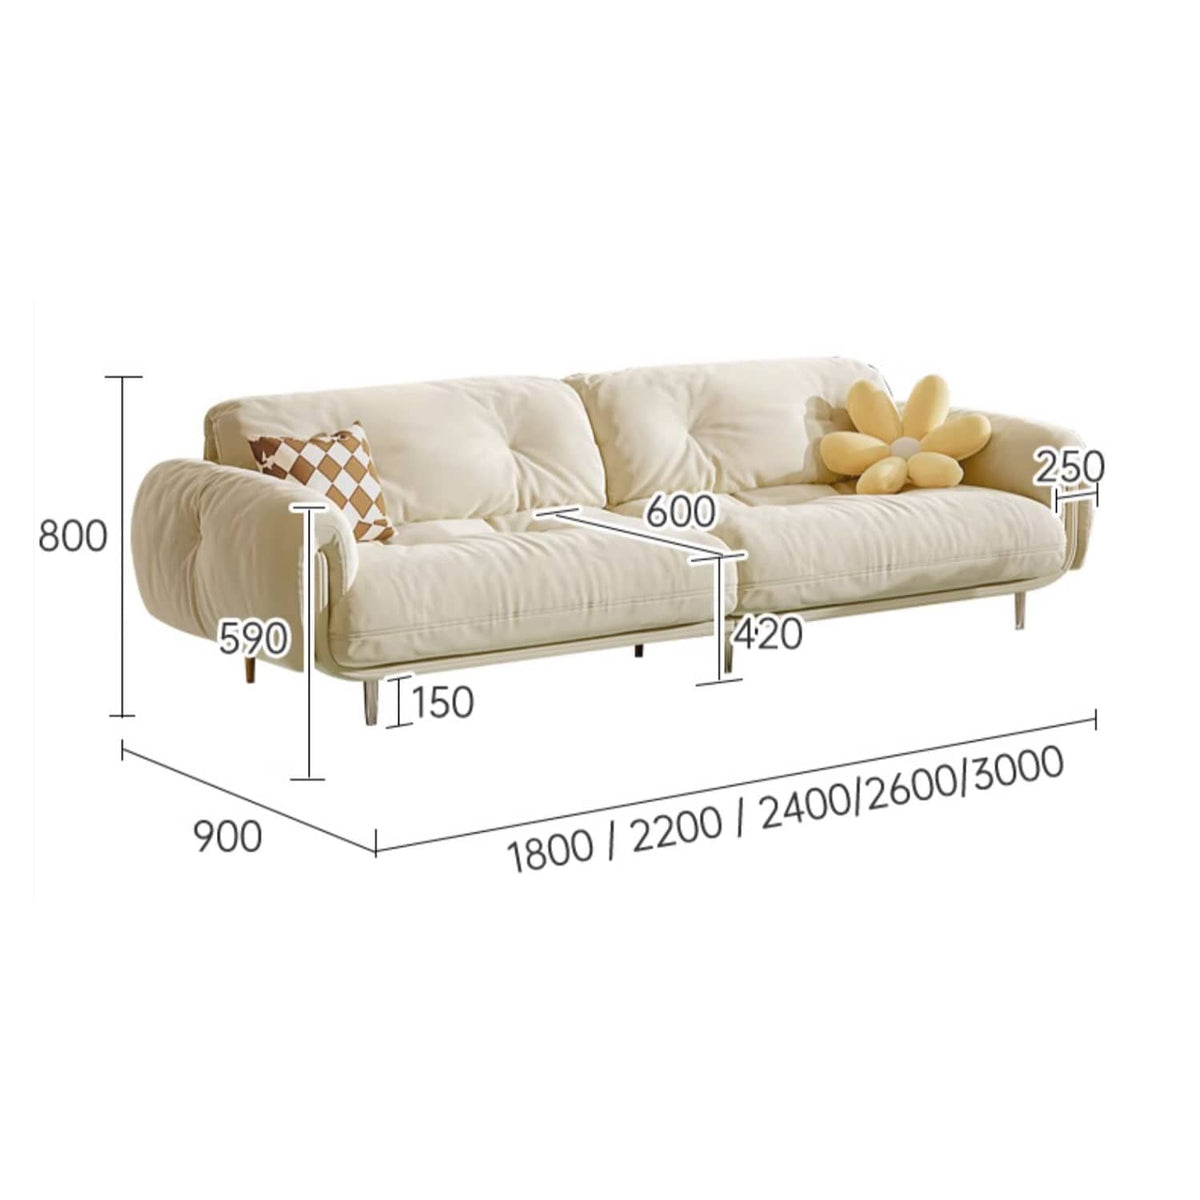 Luxurious Beige Sofa with Solid Wood Frame & Stainless Steel Accents - Premium Down & Faux Leather Upholstery fbby-1389